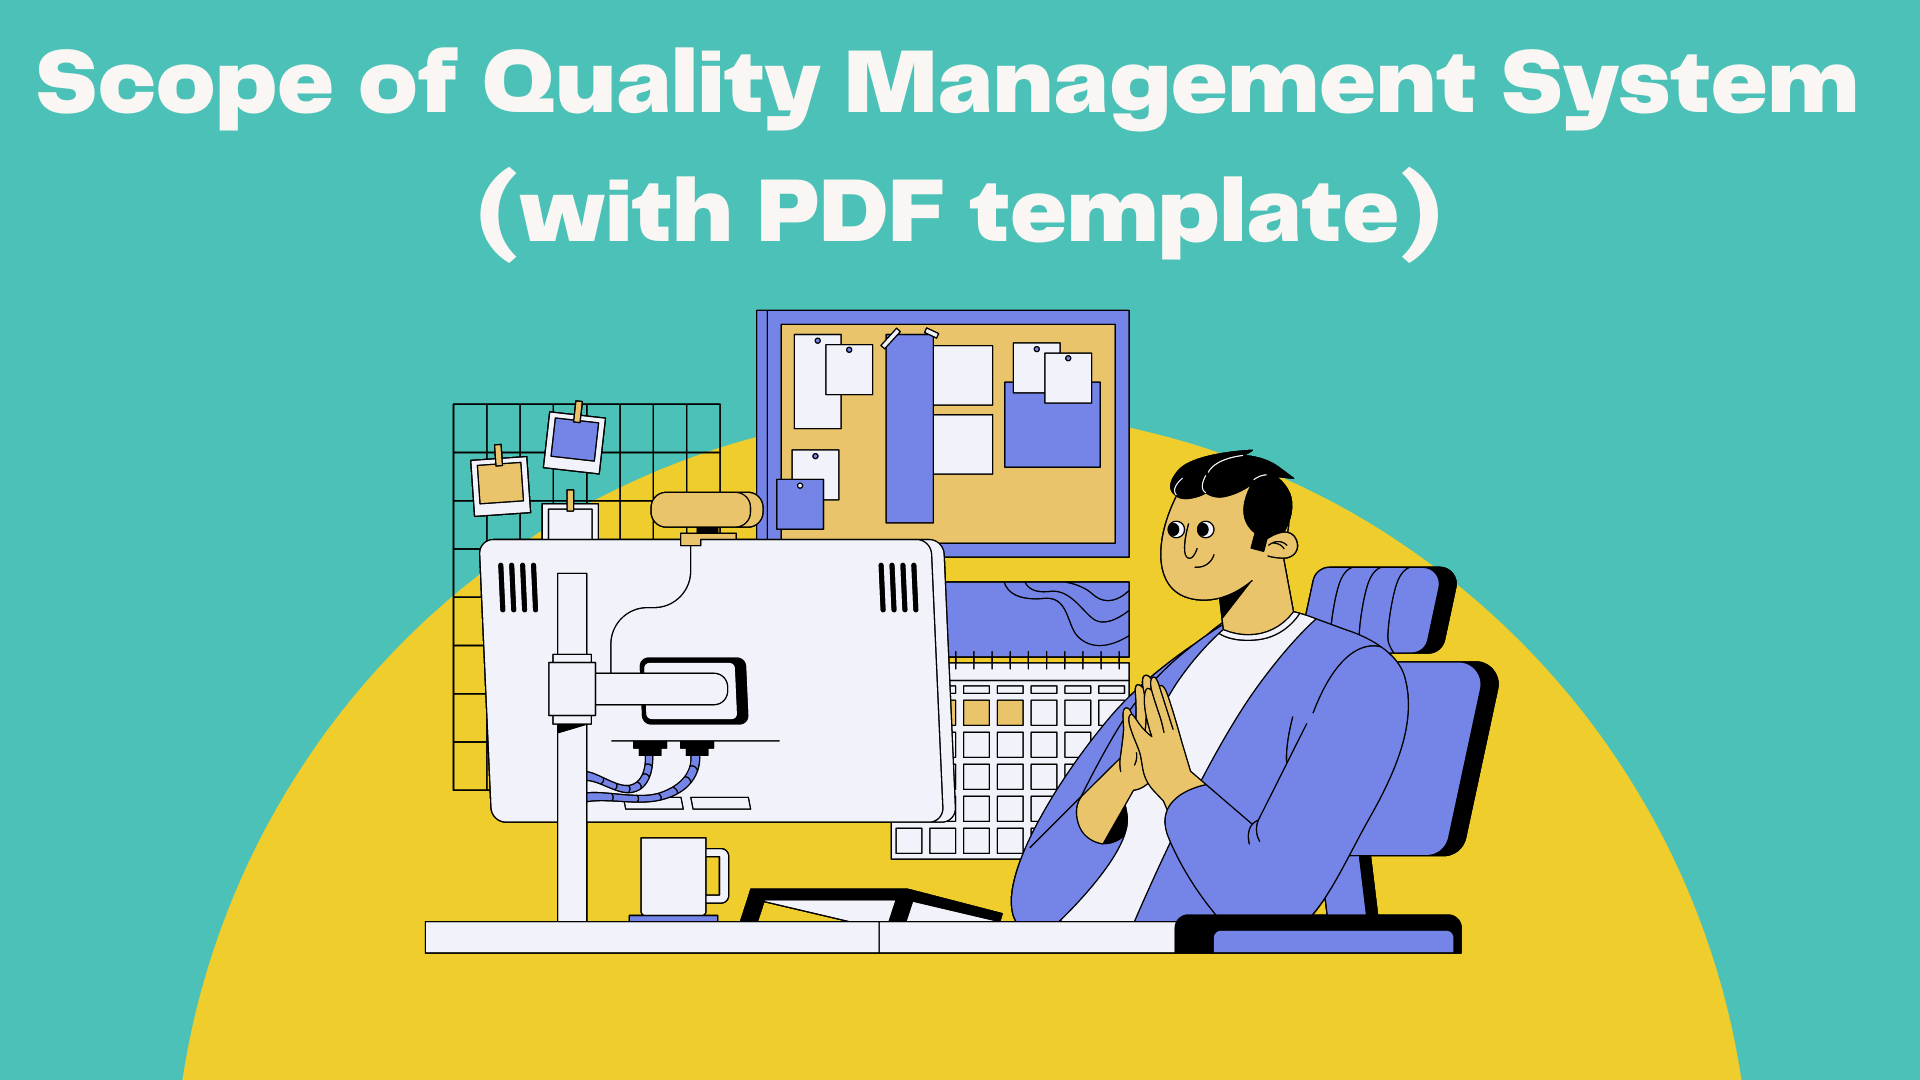 Scope of Quality Management System PDF template